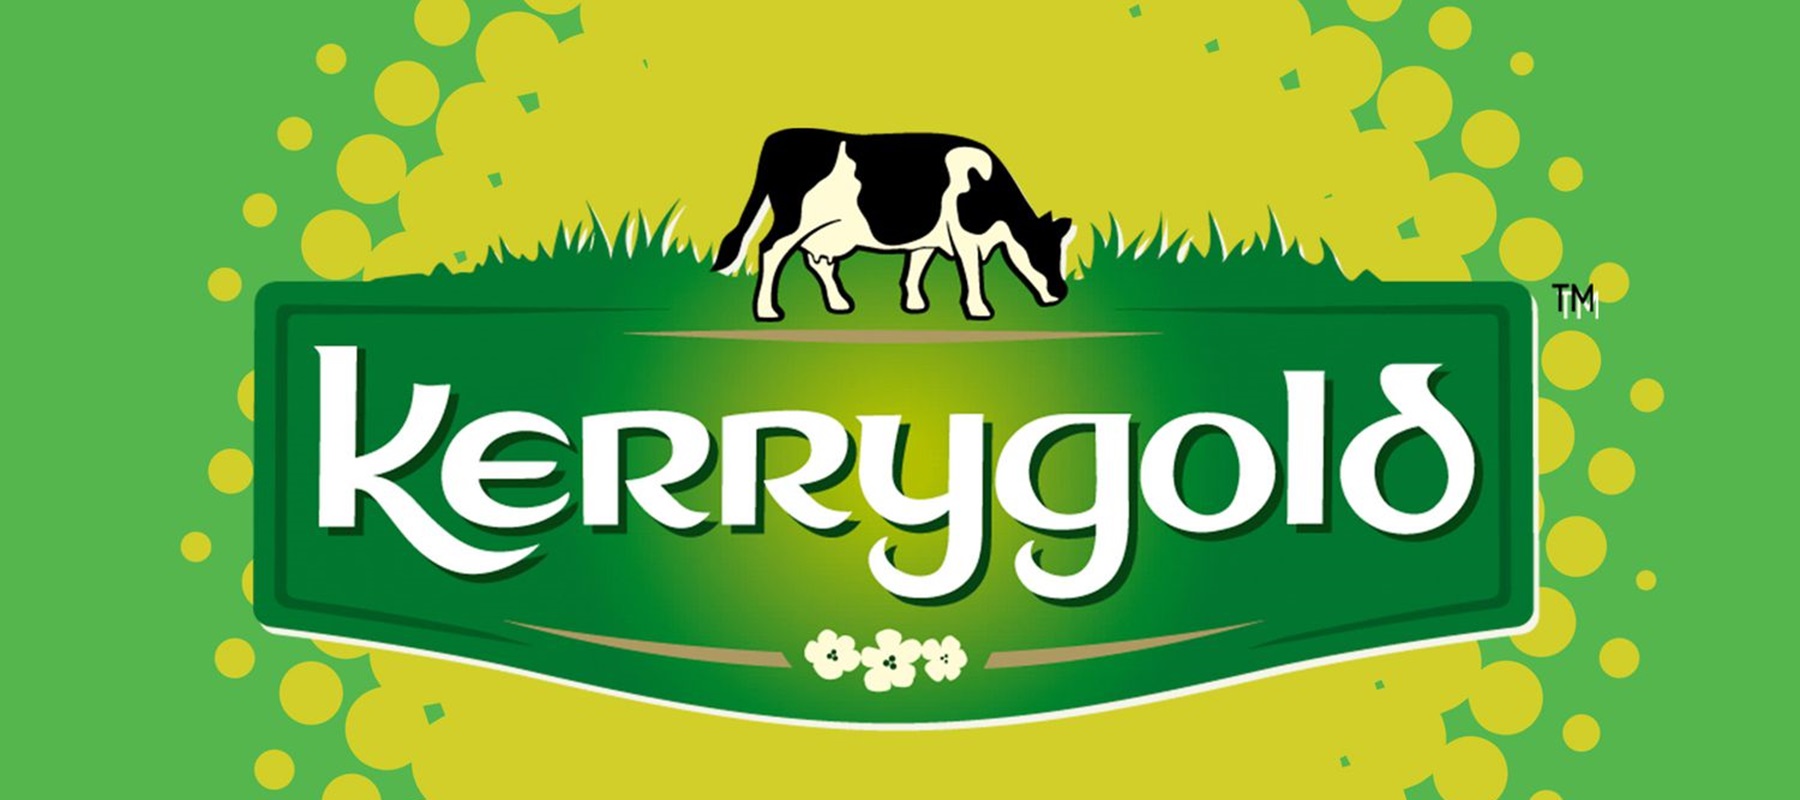 Kerrygold explores the power of mealtime reconnection in new global advertising campaign